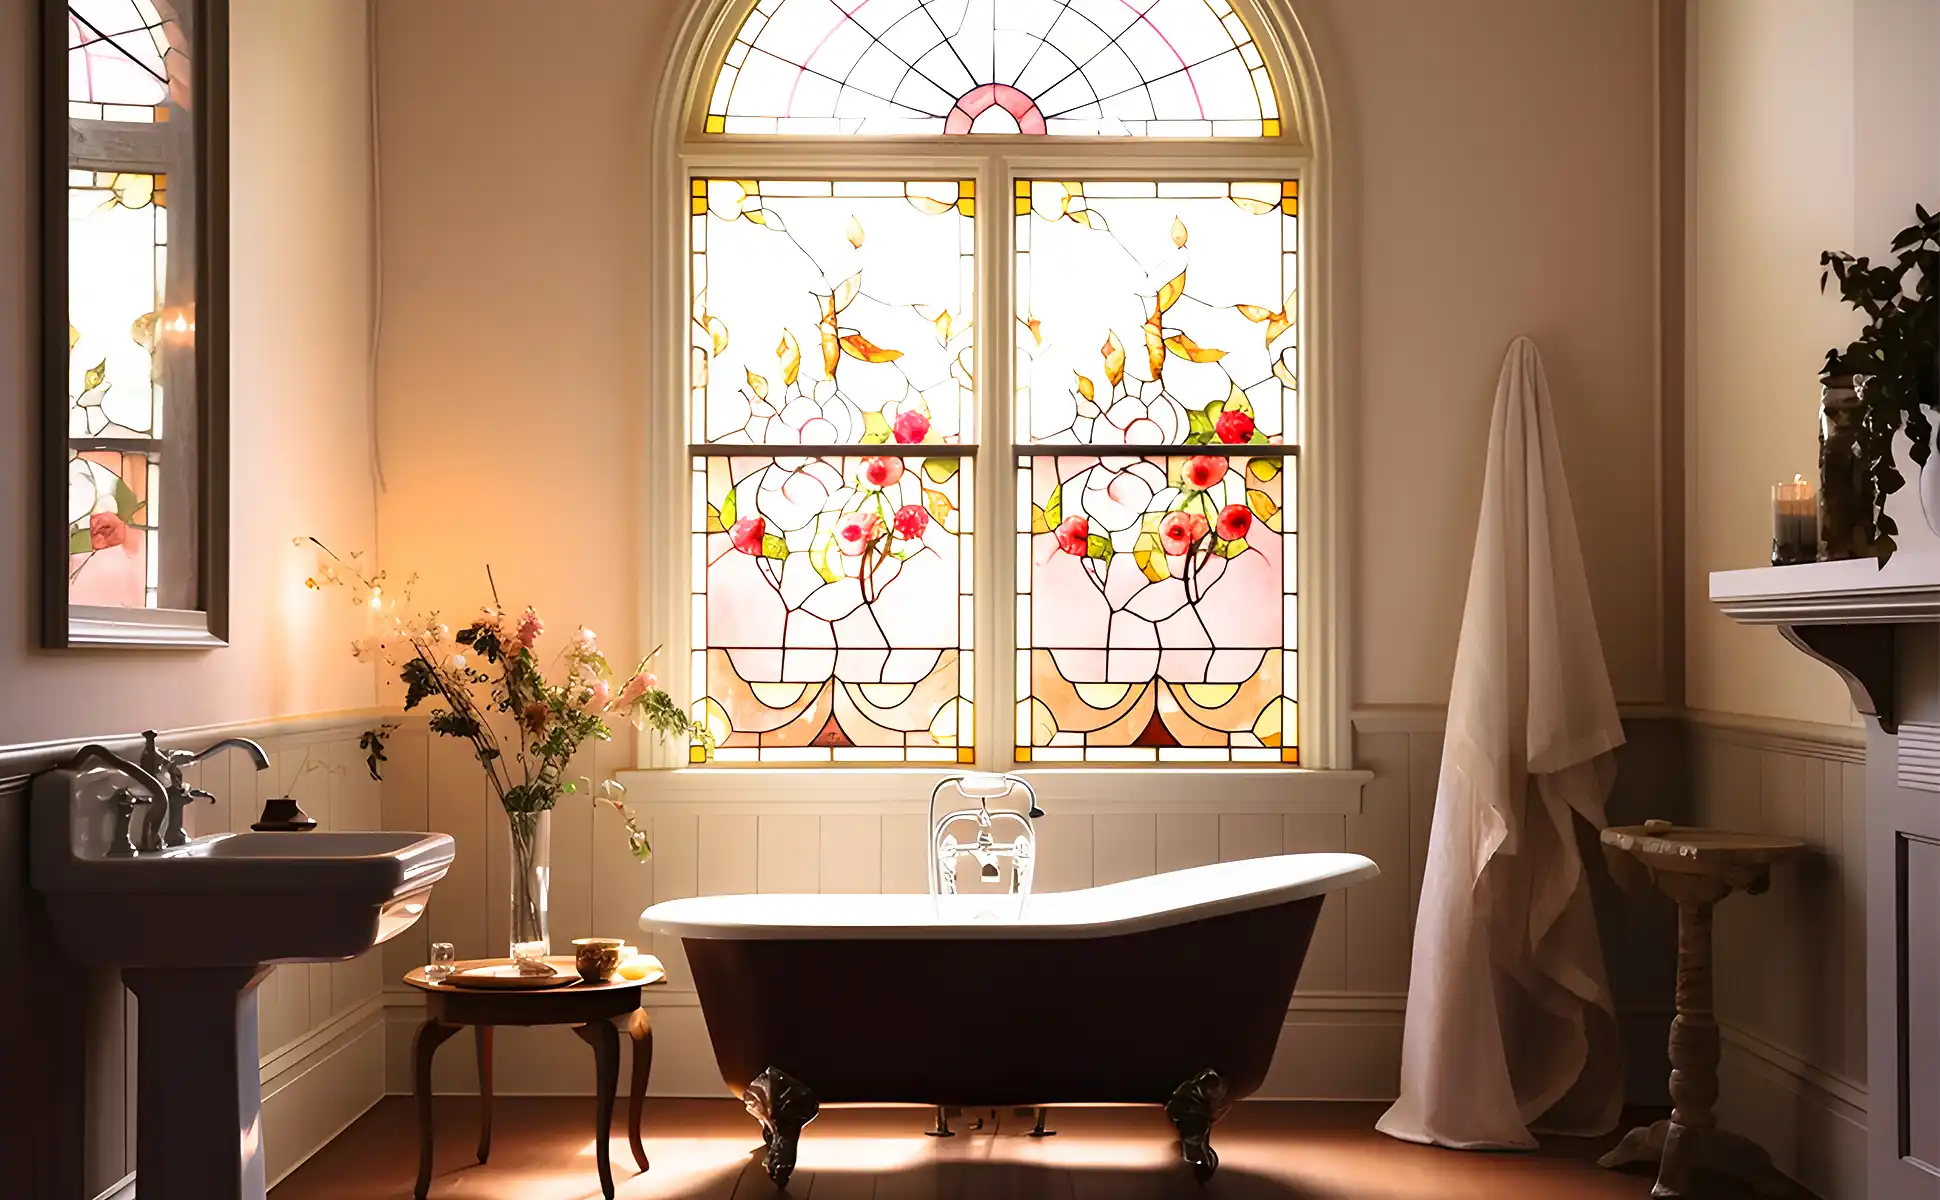 A bathroom with a stained glass window.